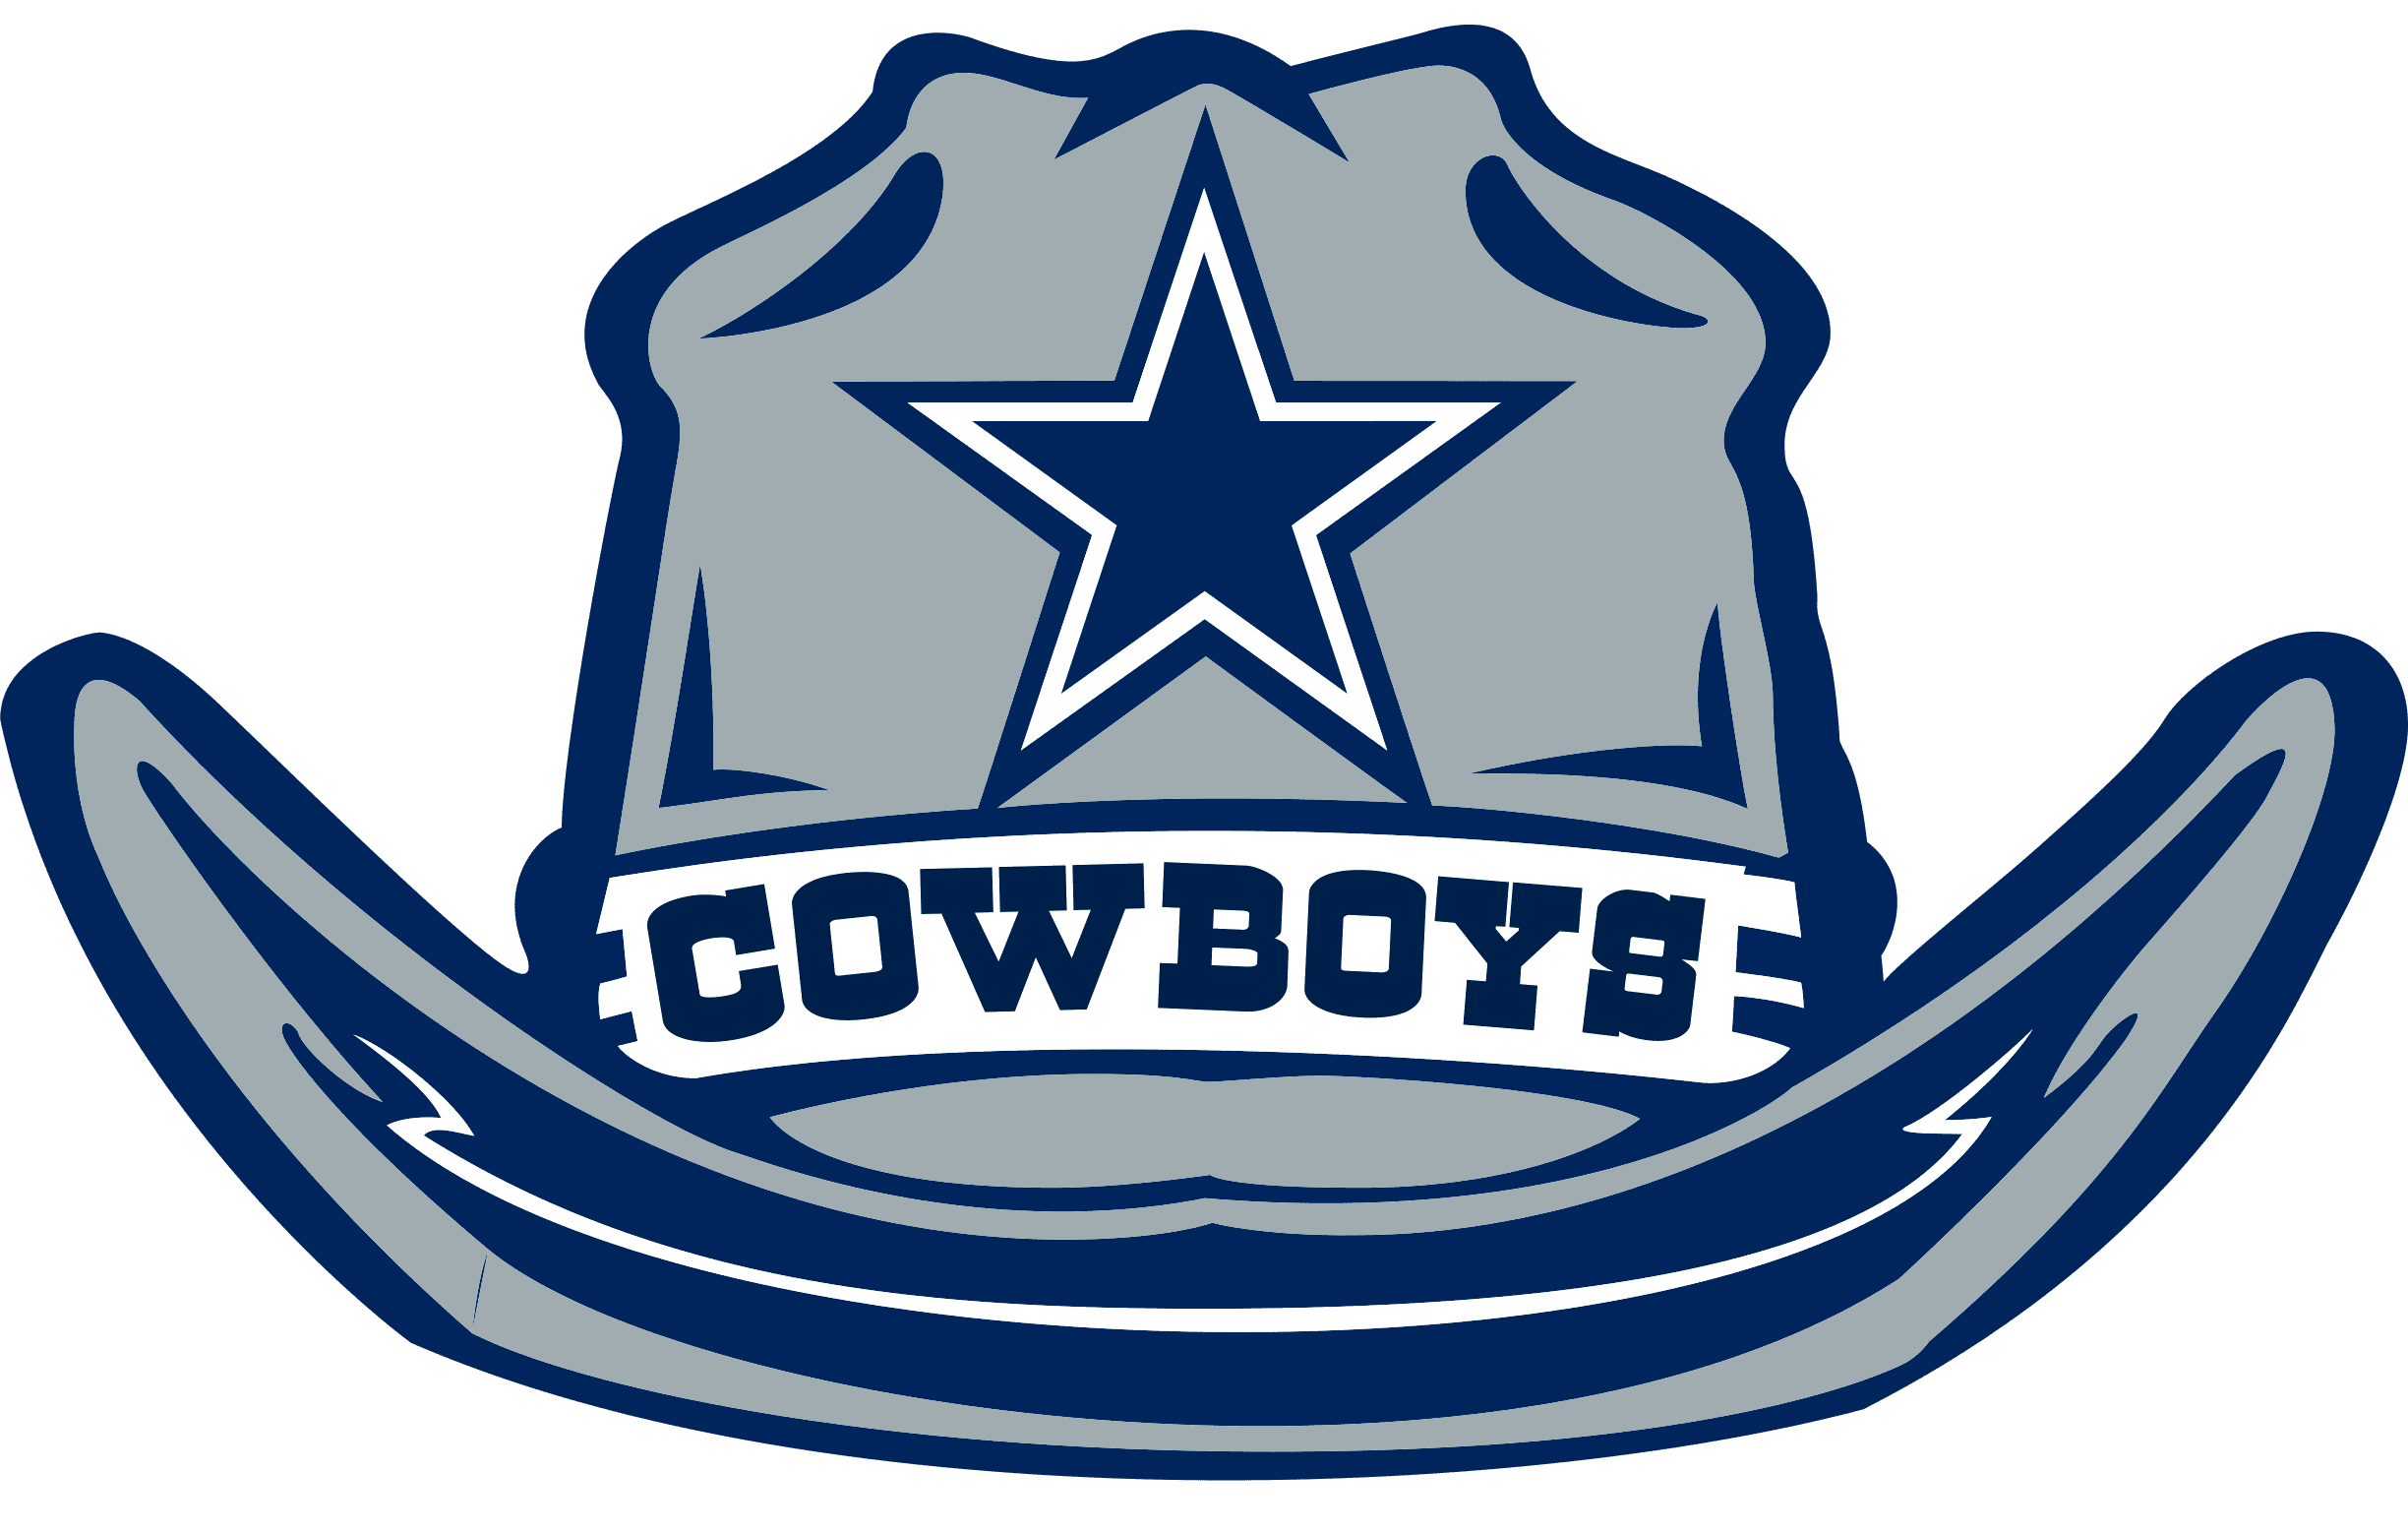 Free Cowboy Images Animated Cowboys Clipart Graphics Clip Art